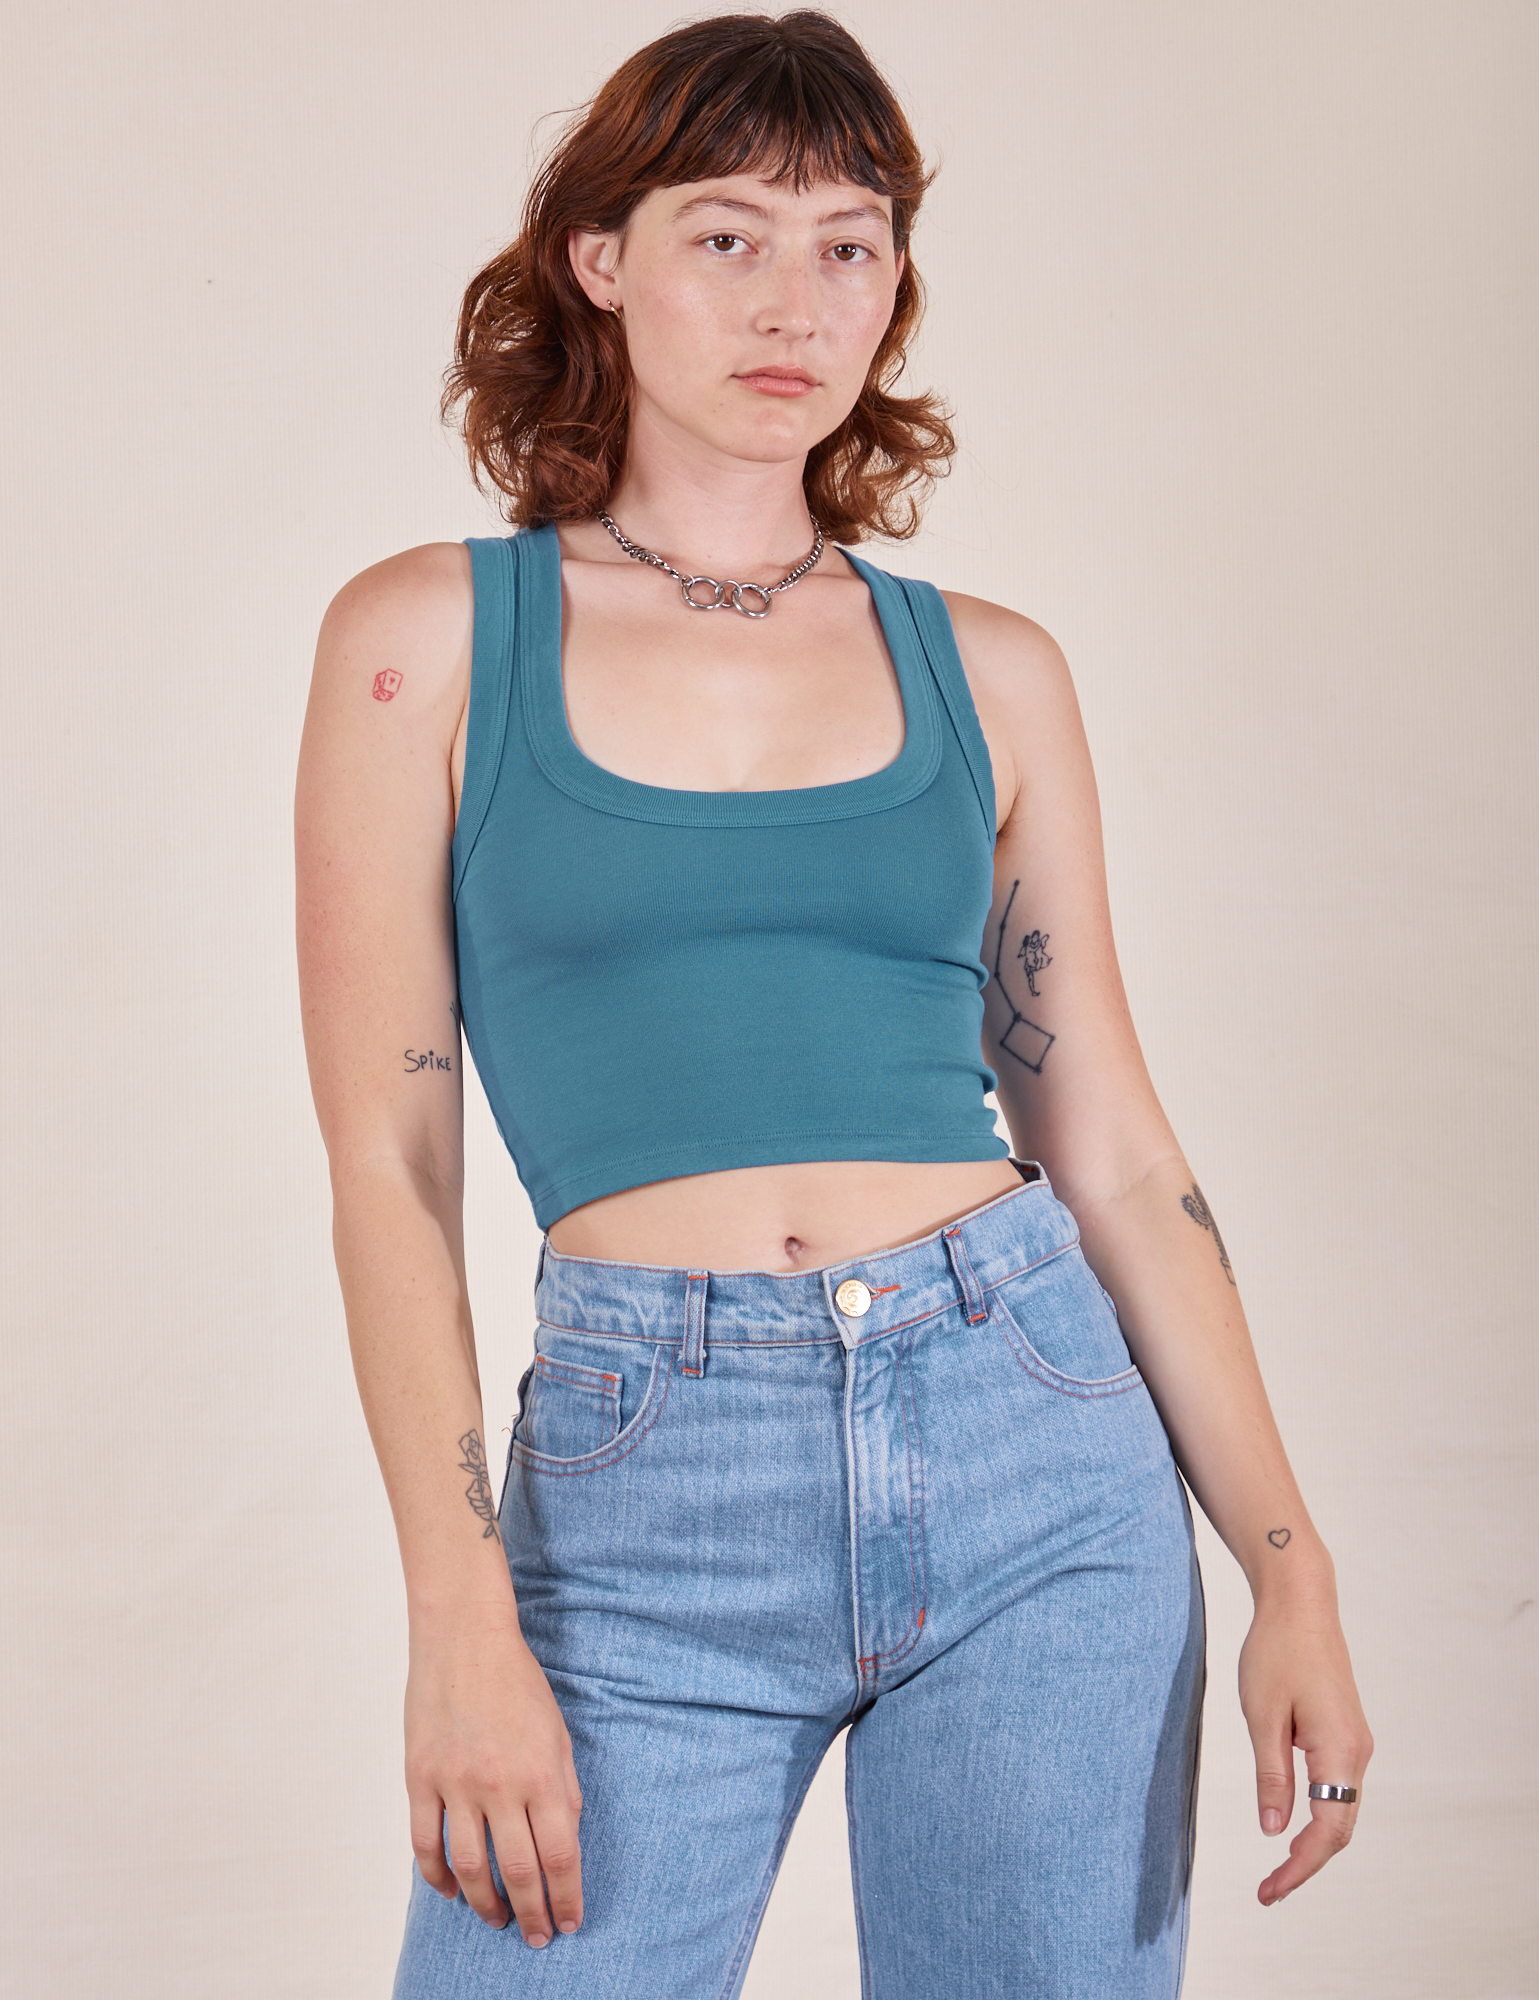 Alex is 5&#39;8&quot; and wearing P Cropped Tank Top in Marine Blue